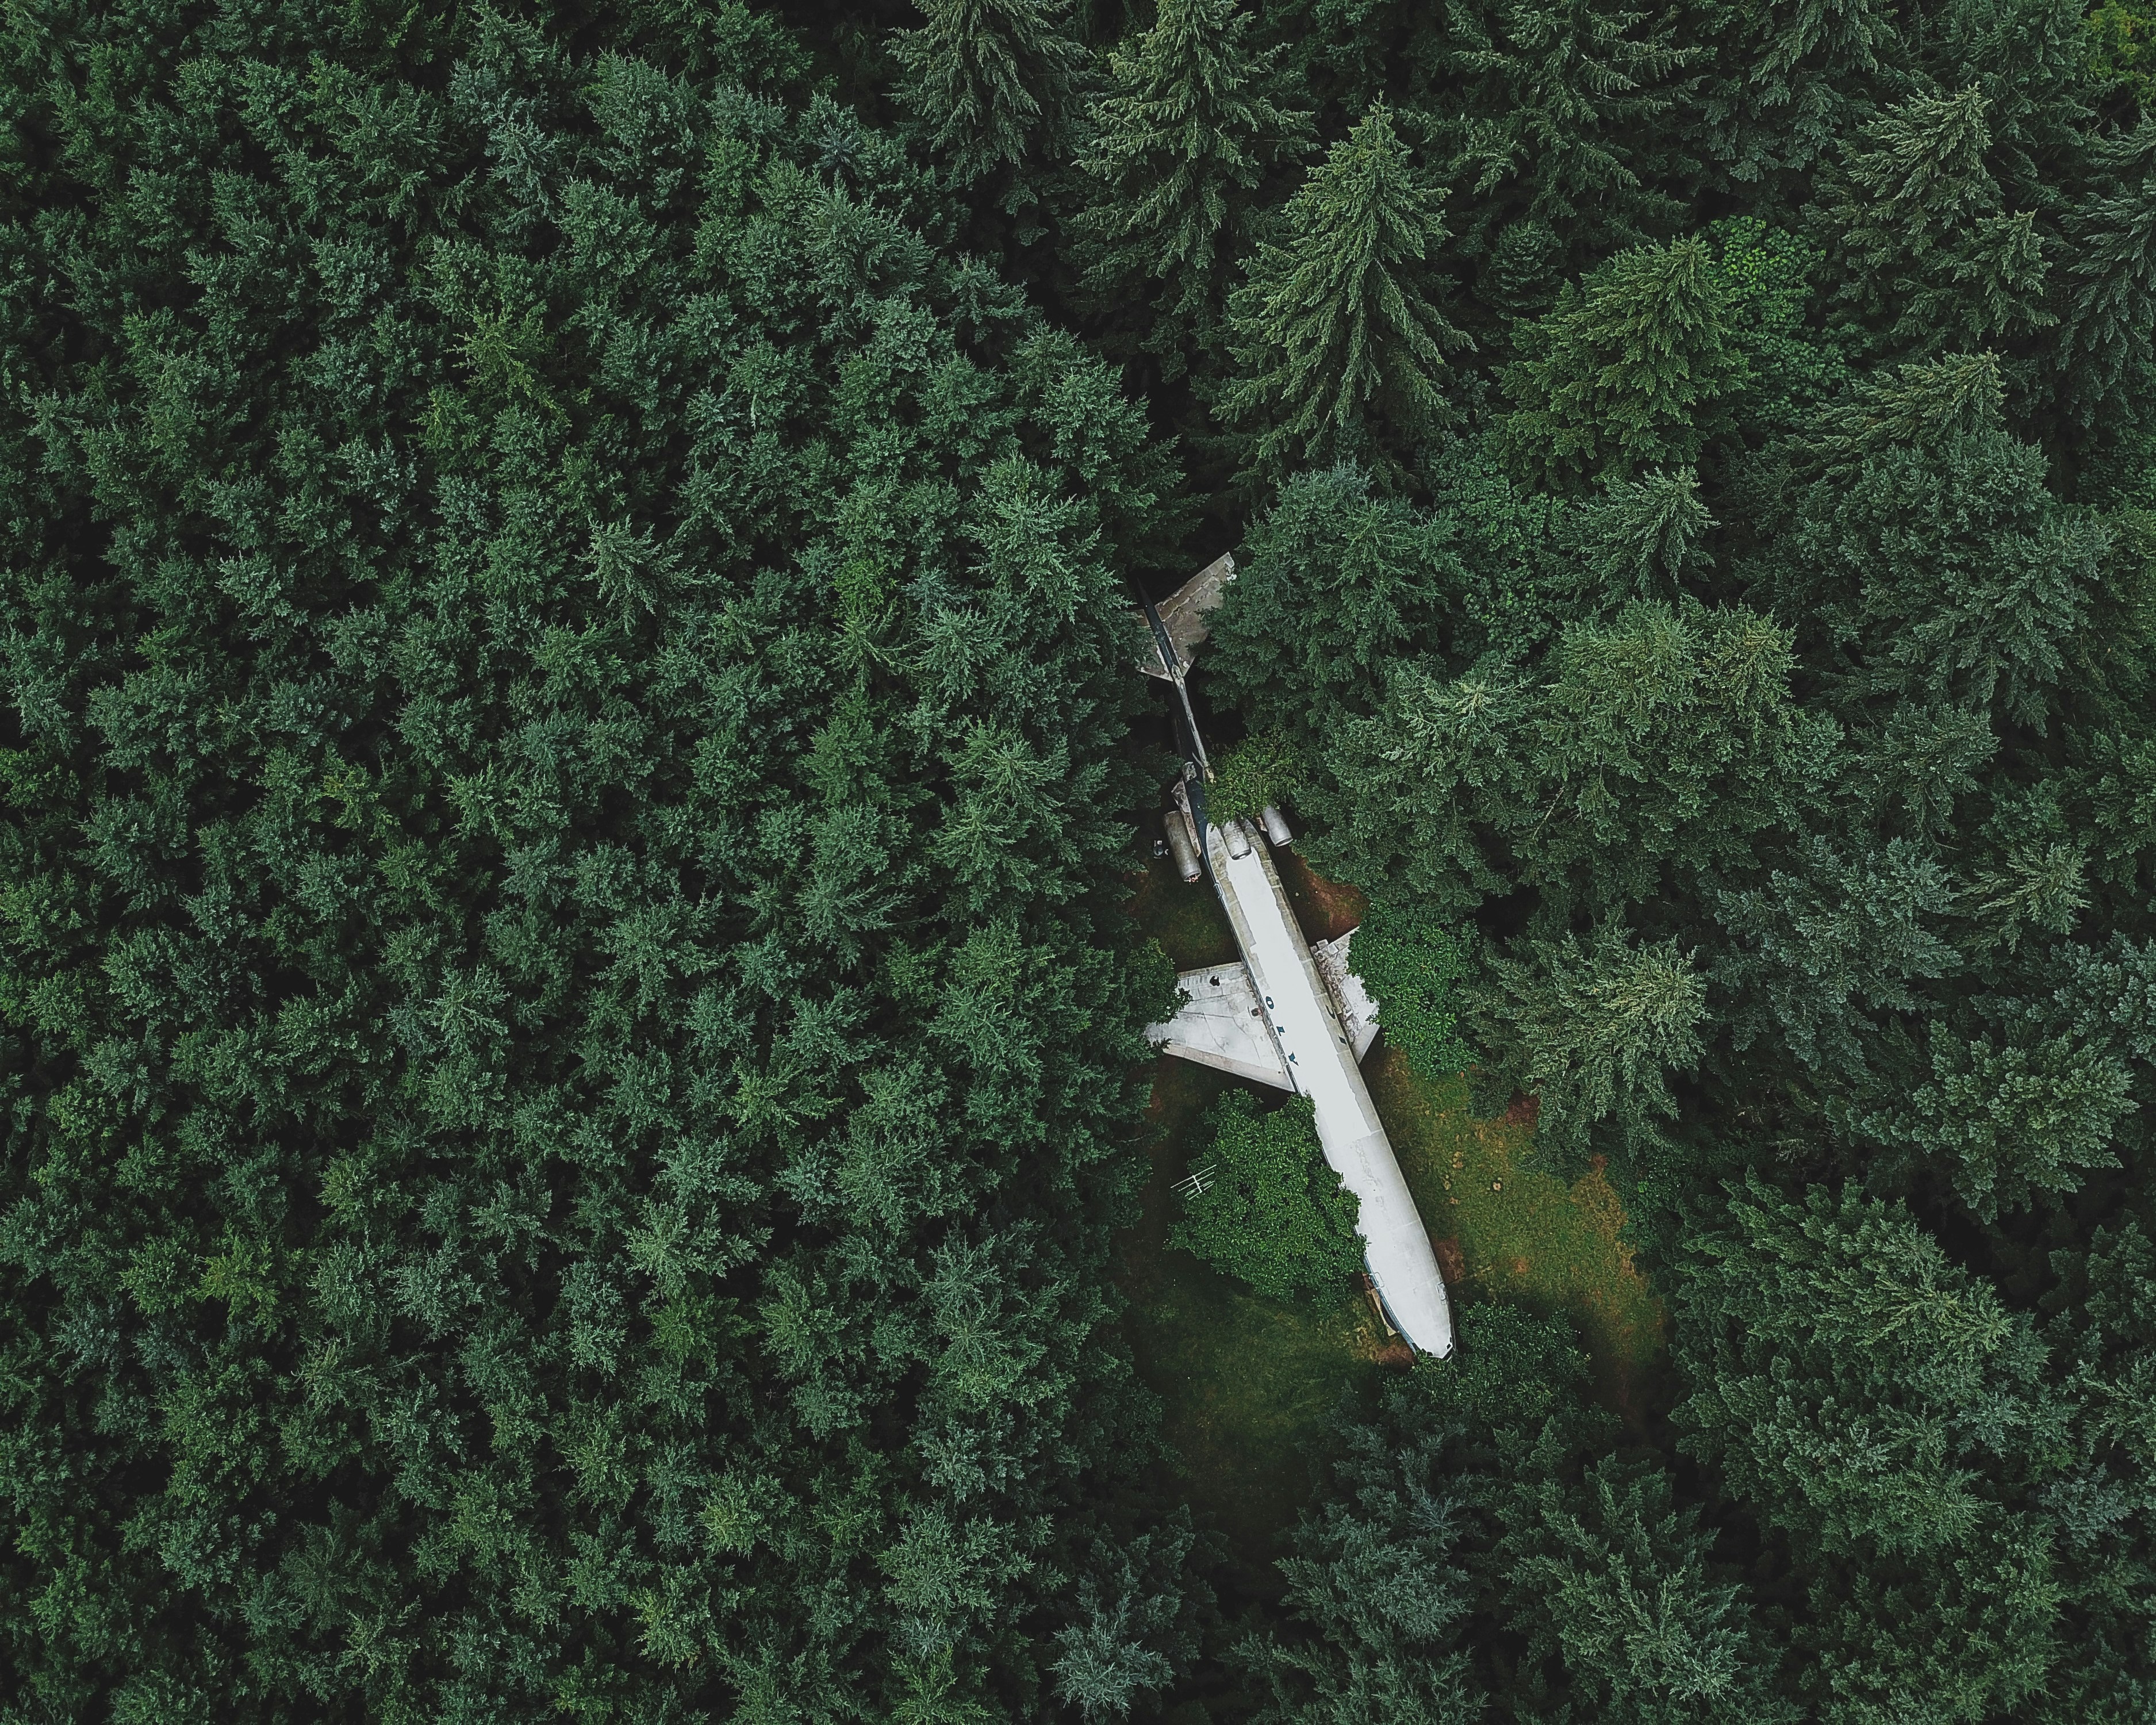 white and black plane flying over green trees during daytime